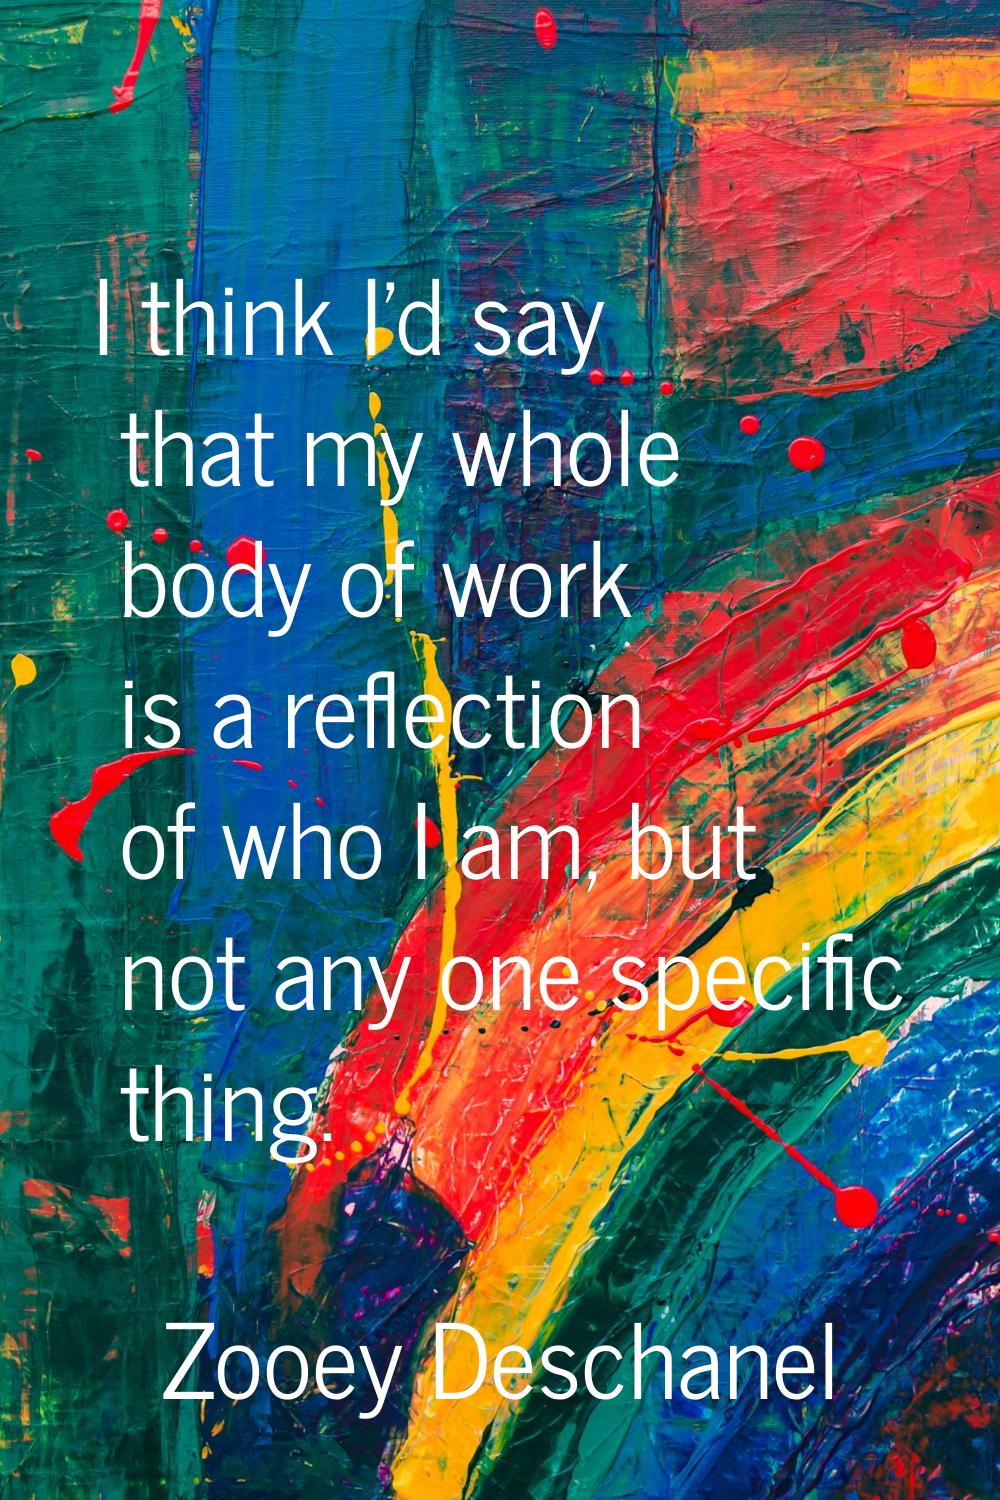 I think I'd say that my whole body of work is a reflection of who I am, but not any one specific th